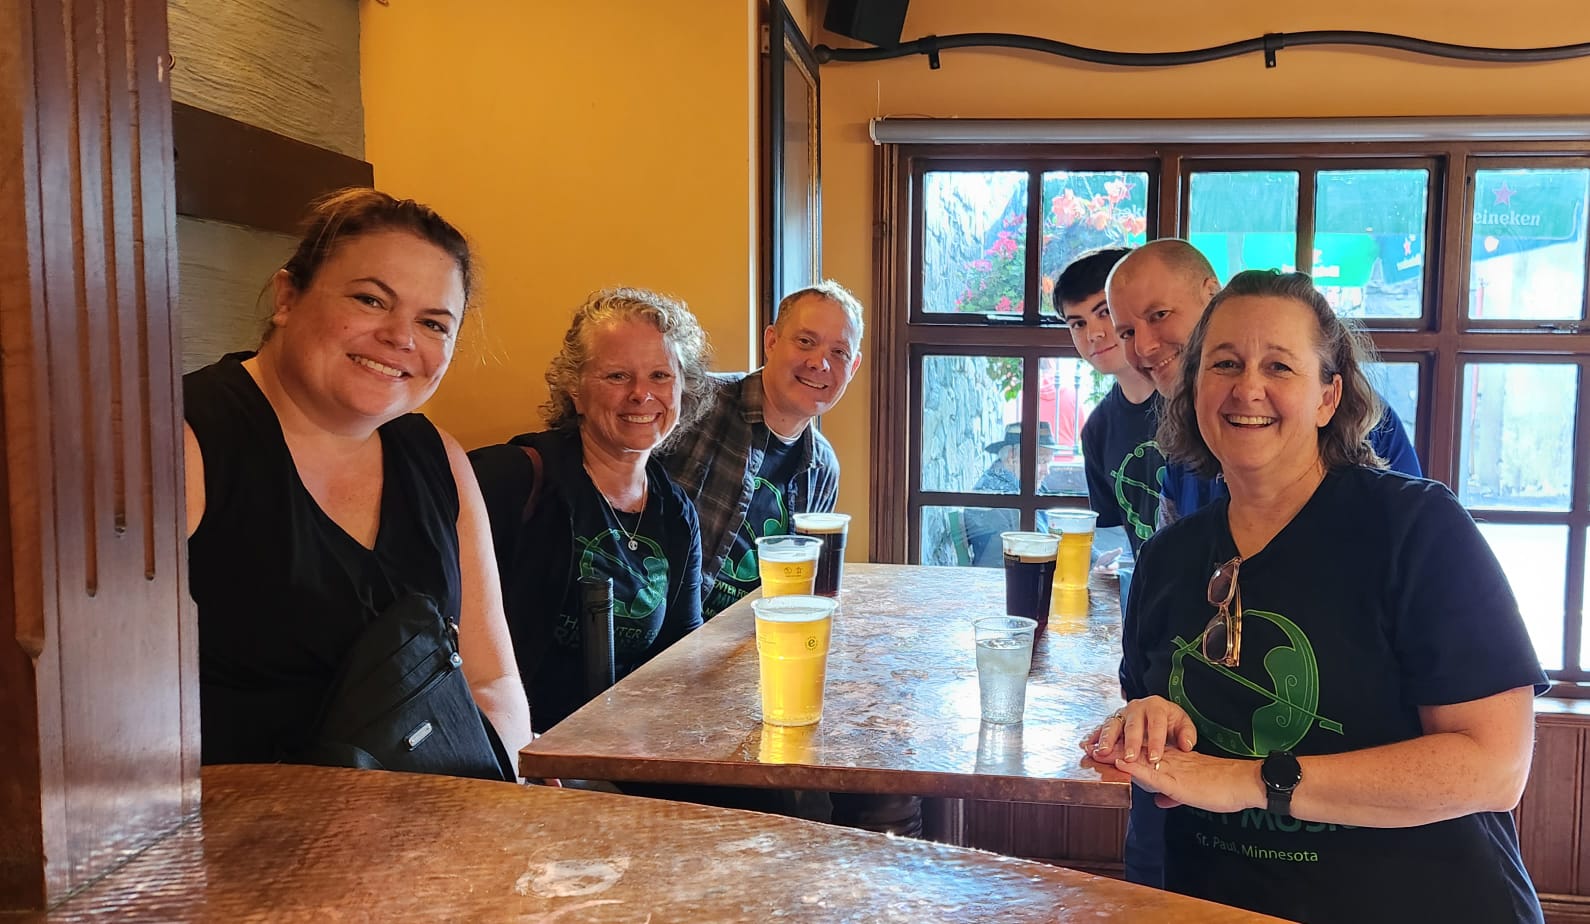 Amazing CIM Parents, like these ones, supported their kids by bringing them over to Ireland, and listening to hours and hours of tunes night after night over a pint. There were many laughs, good chats, and gorgeous tunes. CIM parents are the best!